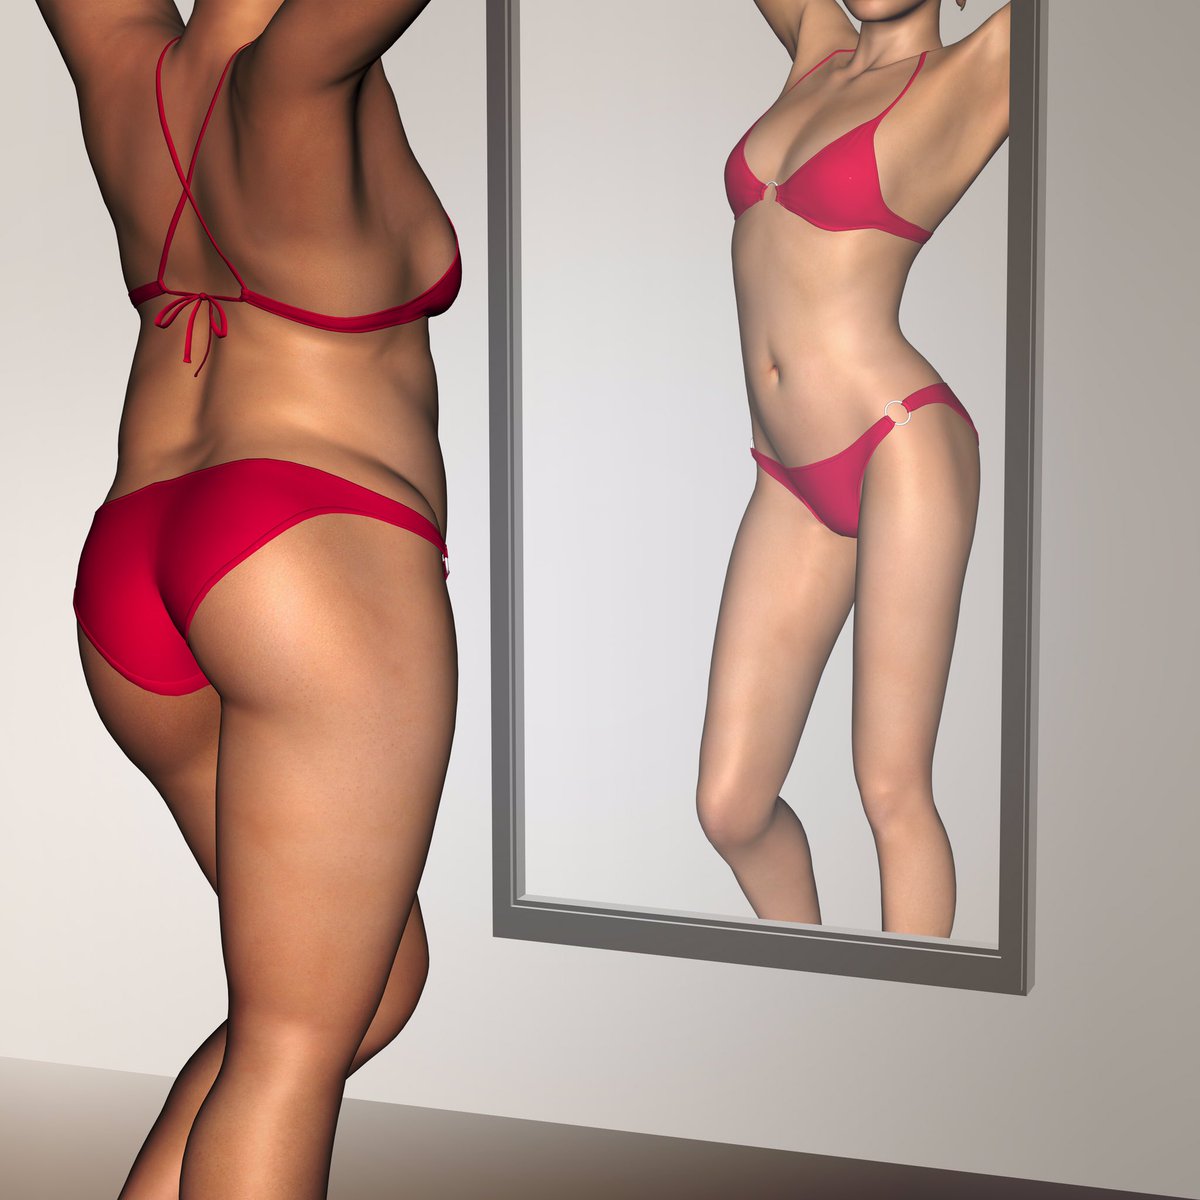 Our Slimming Solutions Sculpt and Shape Your Body! #theshapeofthingstocome #saintslim #summerbody #cellulitereduction